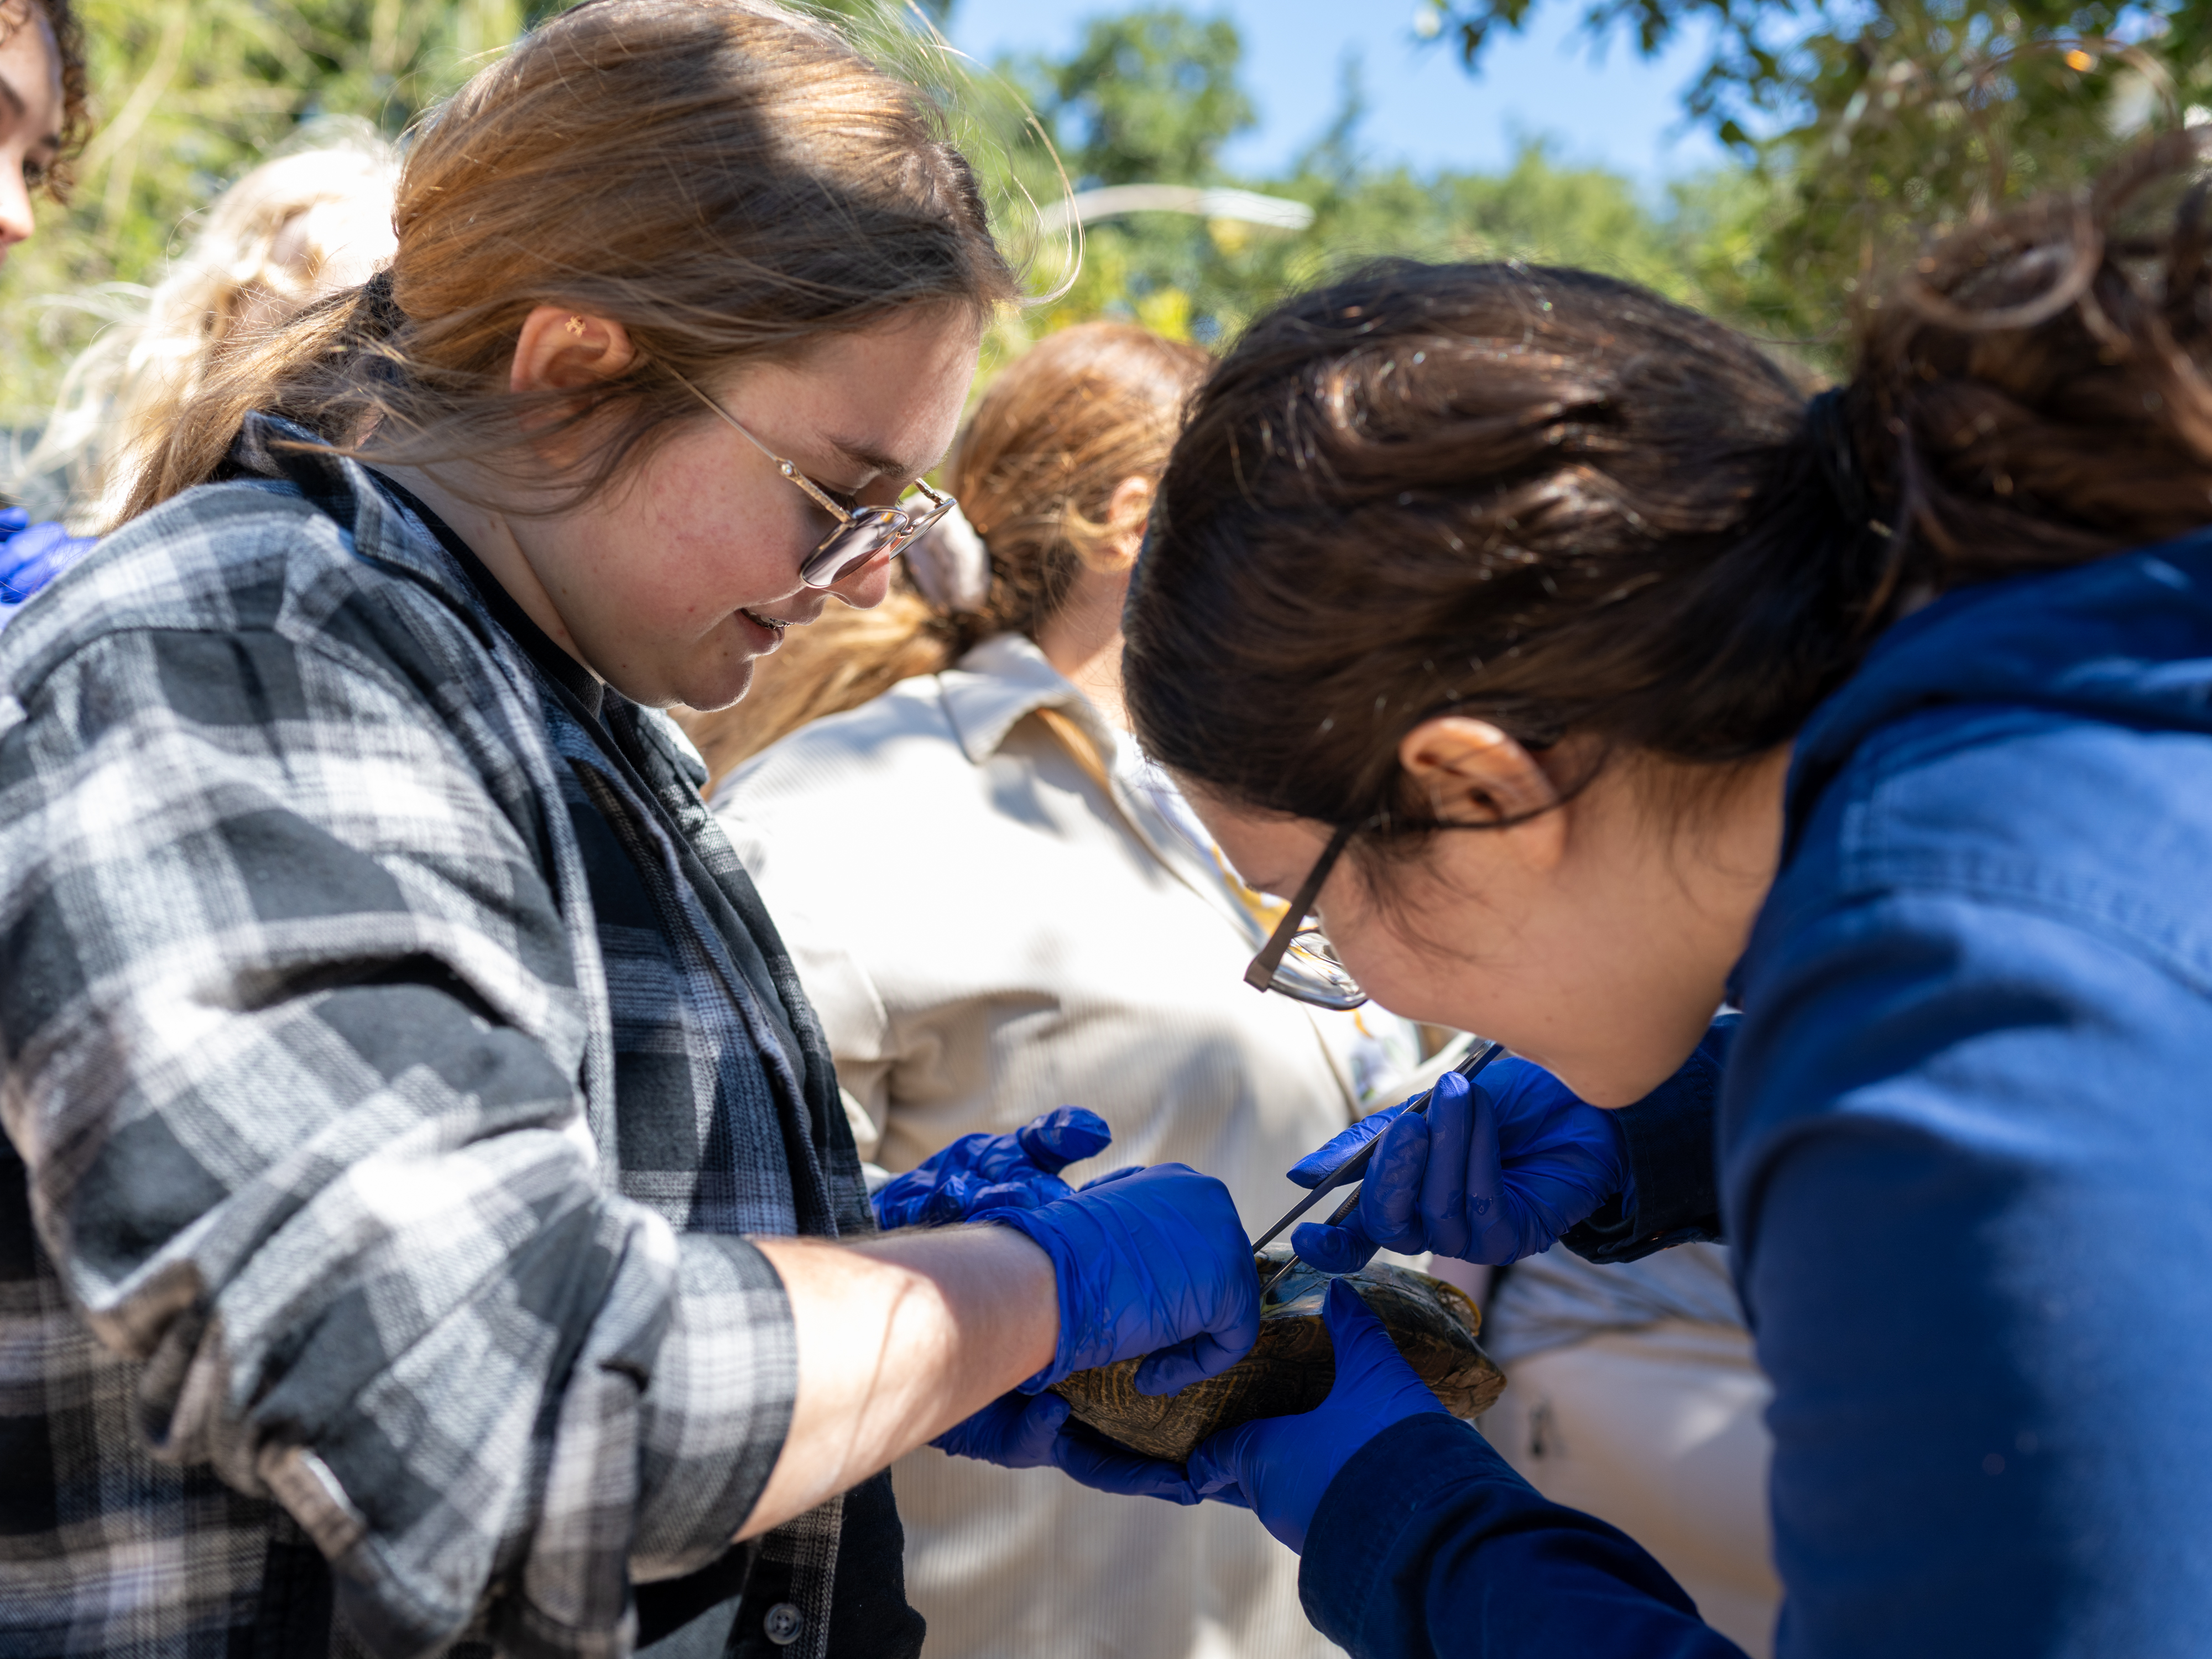 Students gathered at the turtle pond as part of an ongoing research project.